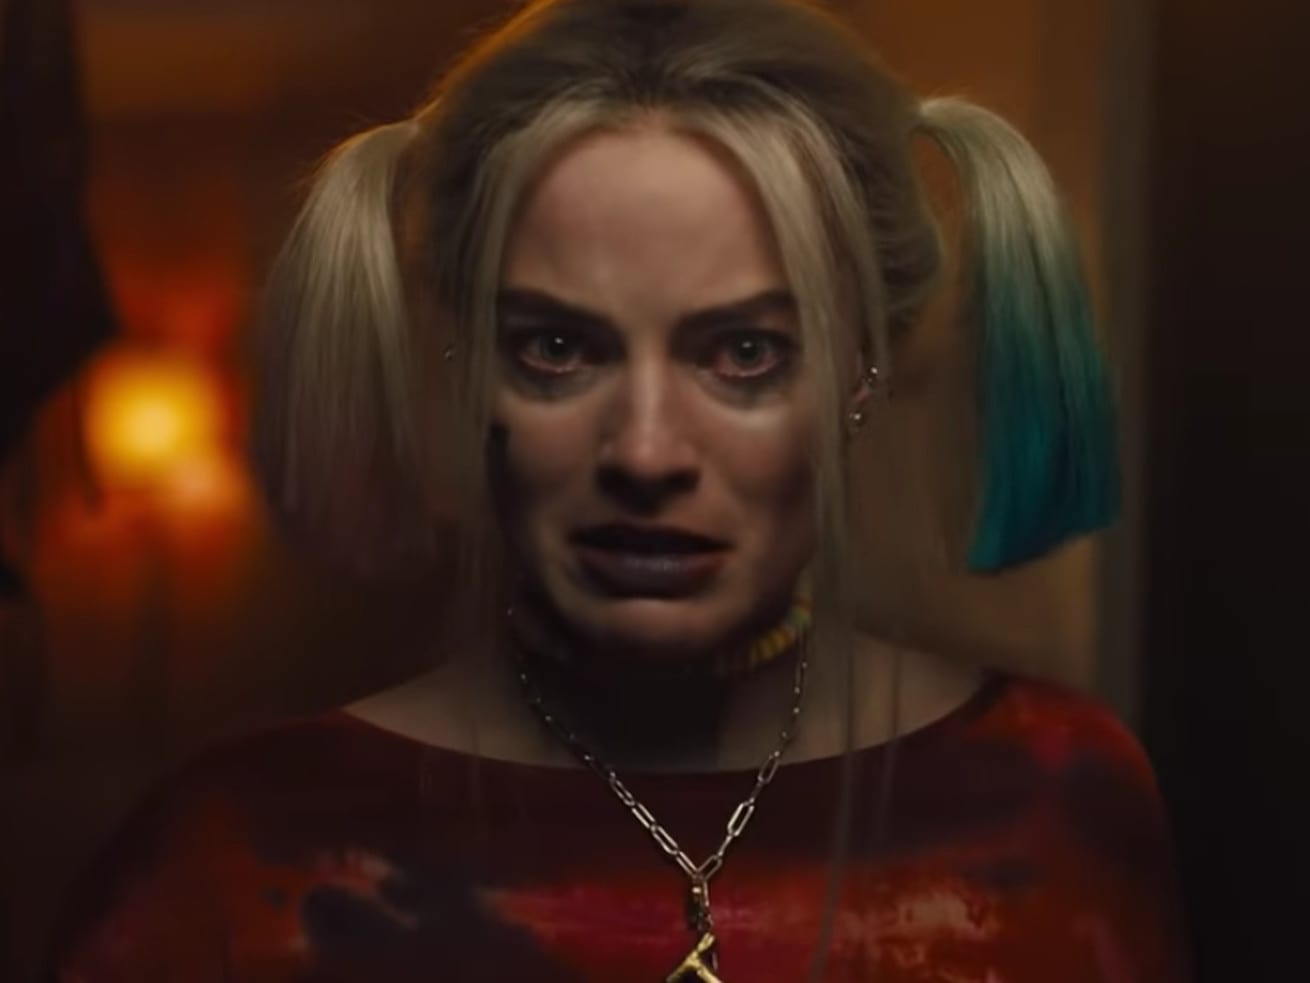 Watch: Margot Robbie’s Harley Quinn takes center stage in the trailer for Birds of Prey